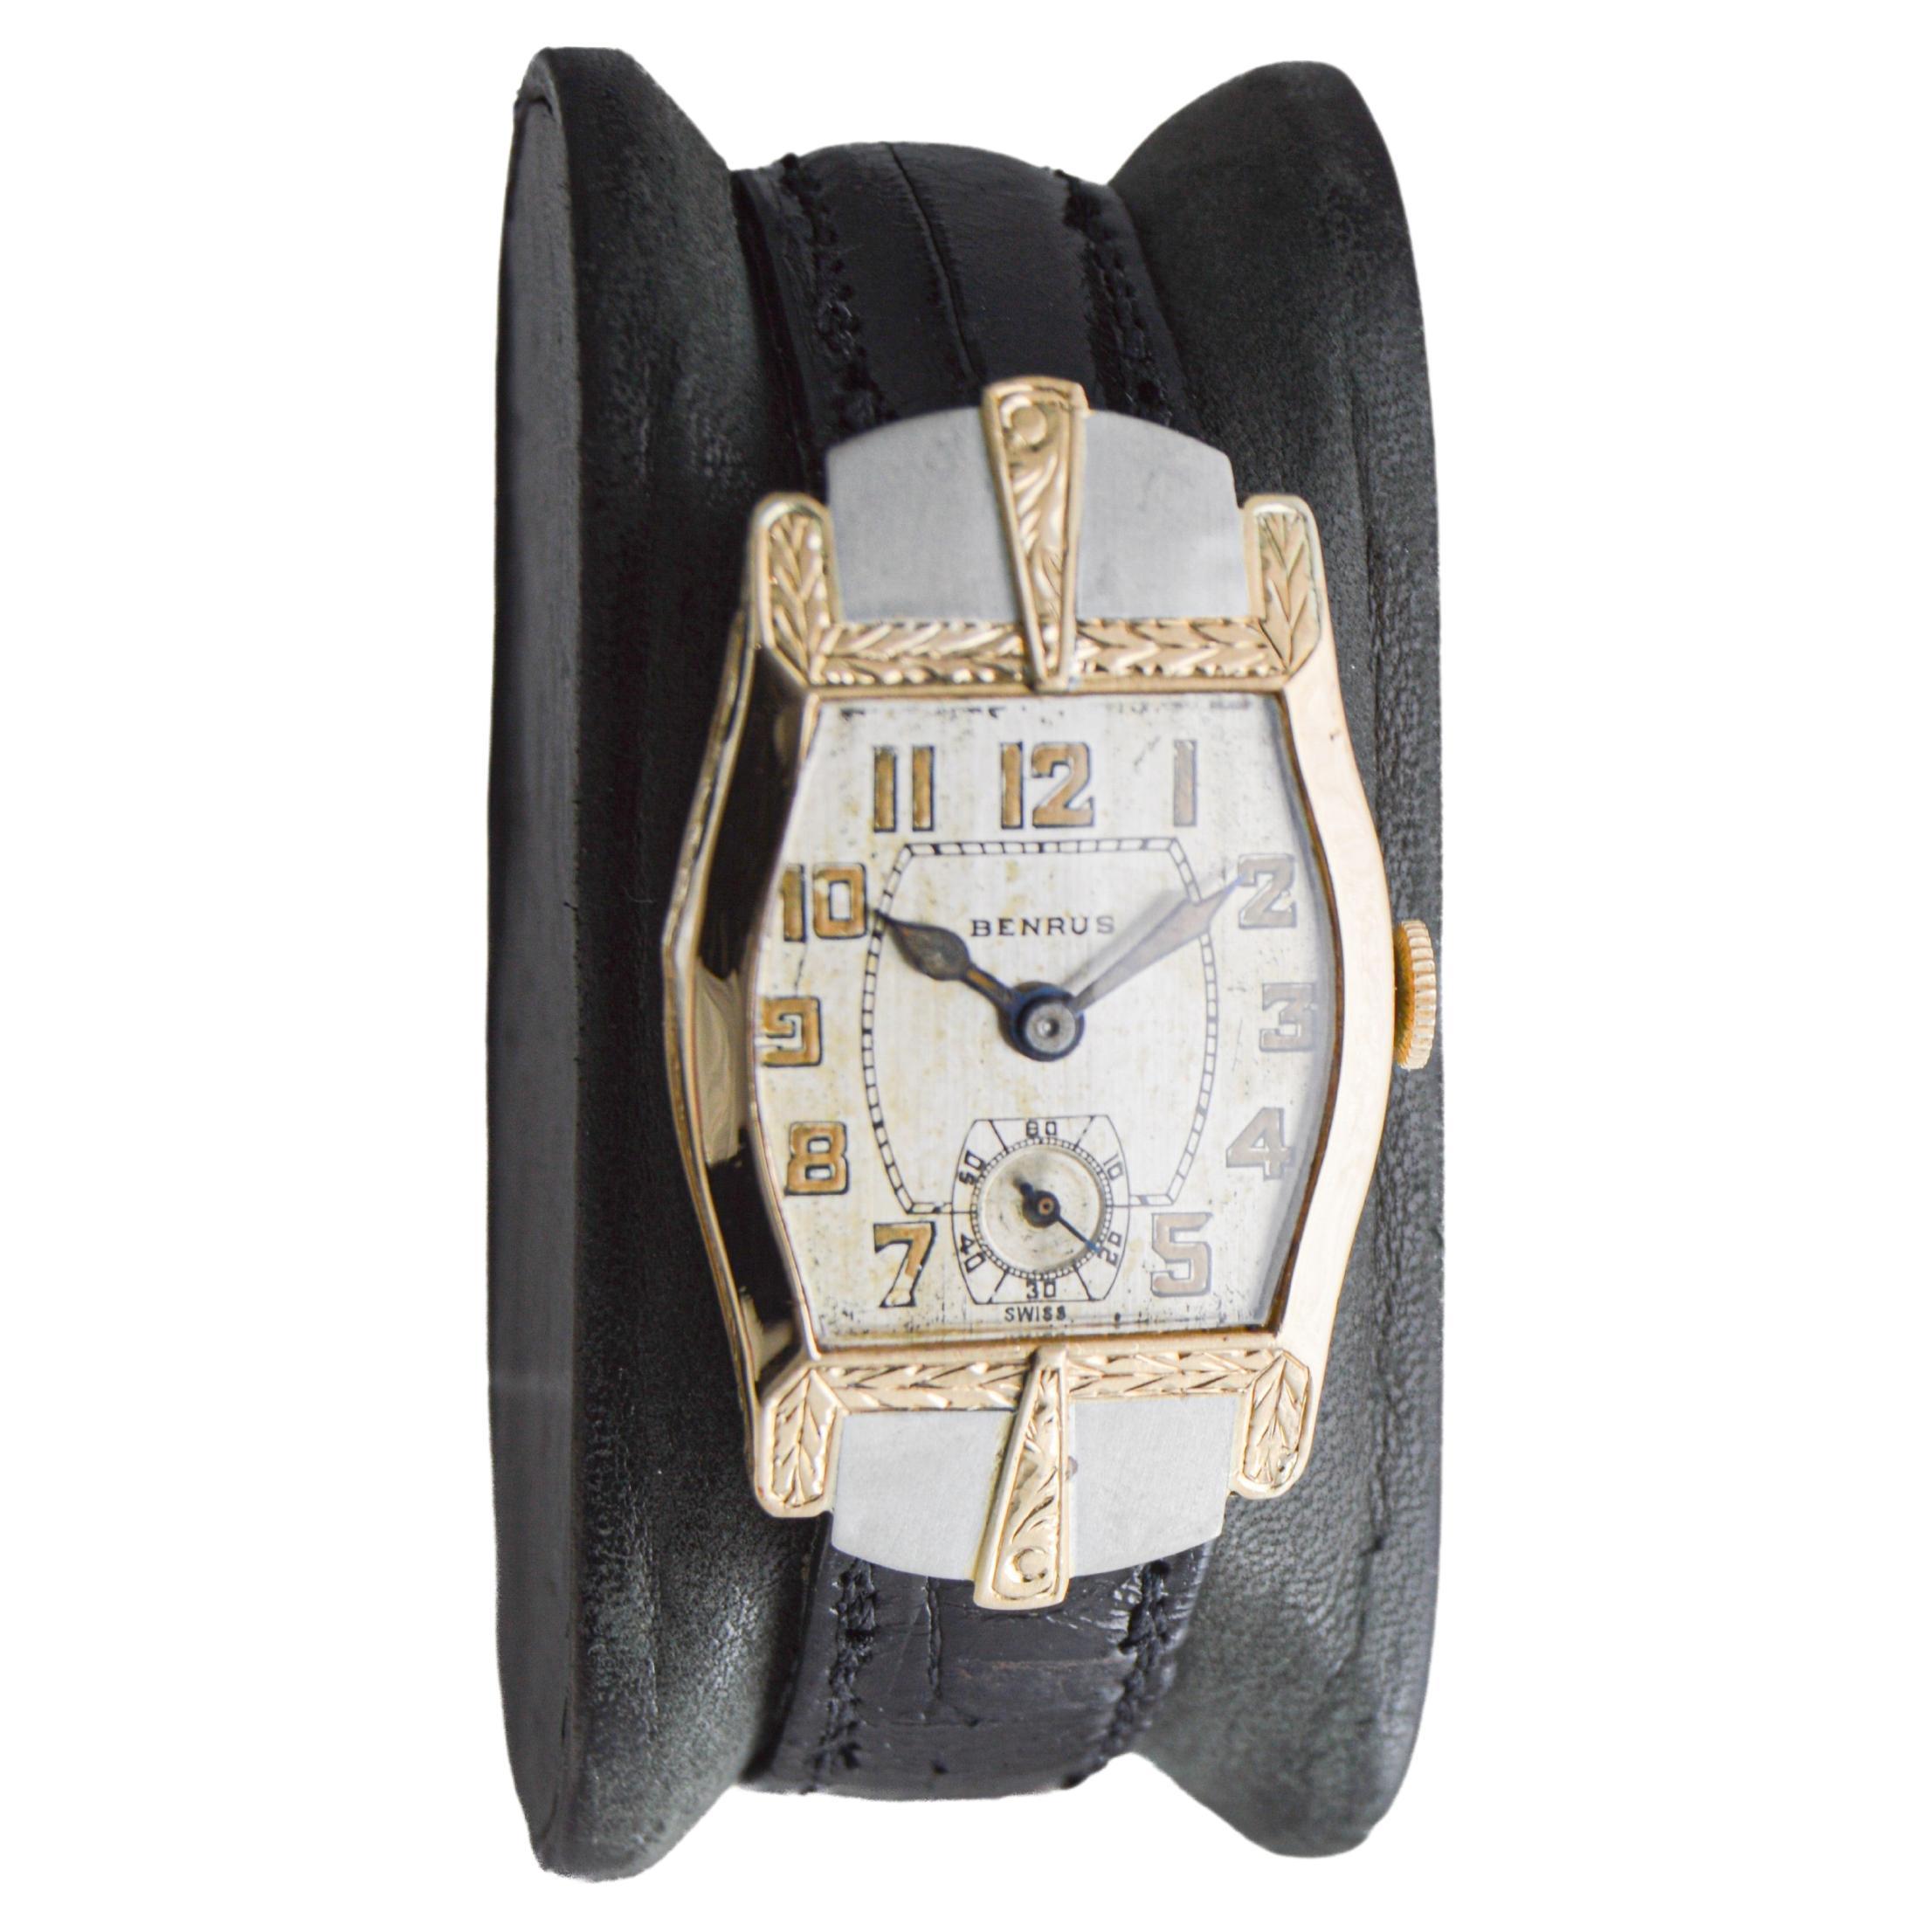 FACTORY / HOUSE: Benrus Watch Company
STYLE / REFERENCE: Art Deco / Tortue Shape
METAL / MATERIAL: 14Kt Two-Tone
CIRCA / YEAR: 1930's
DIMENSIONS / SIZE: Length 43mm X Diameter 26mm
MOVEMENT / CALIBER: Manual Winding / 15 Jewels / 
Caliber 10 1/2